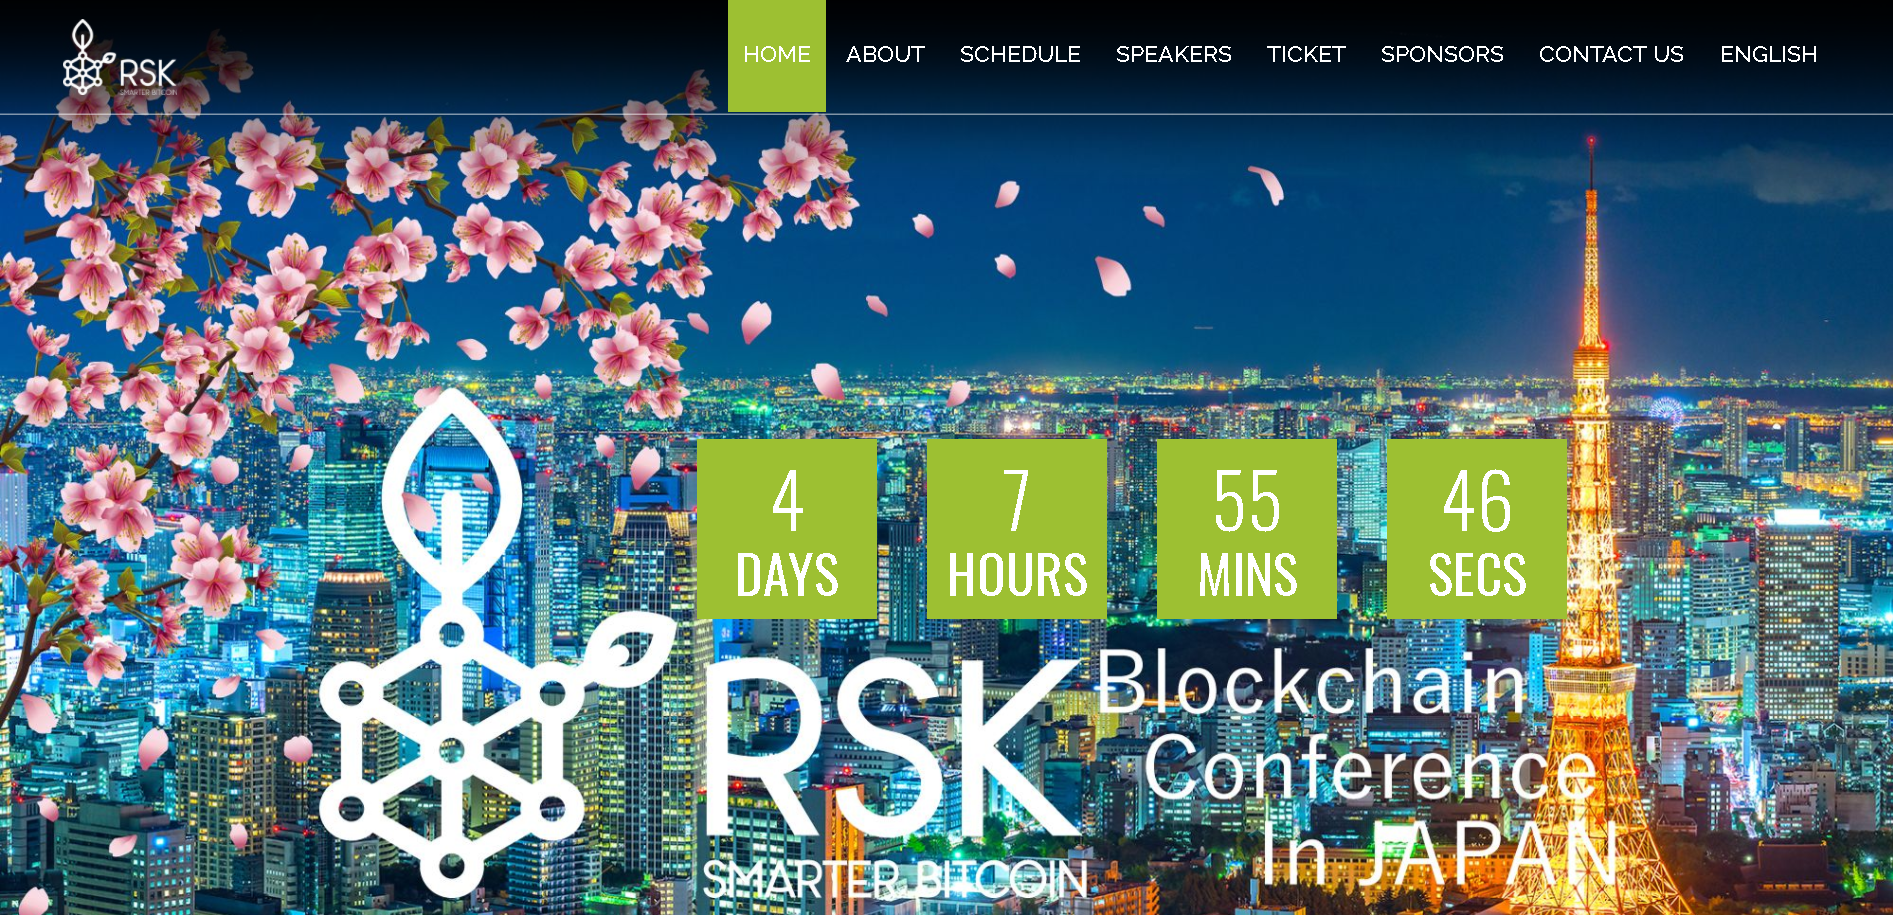 RSK Blockchain Conference in JAPANが4月10日に開催！